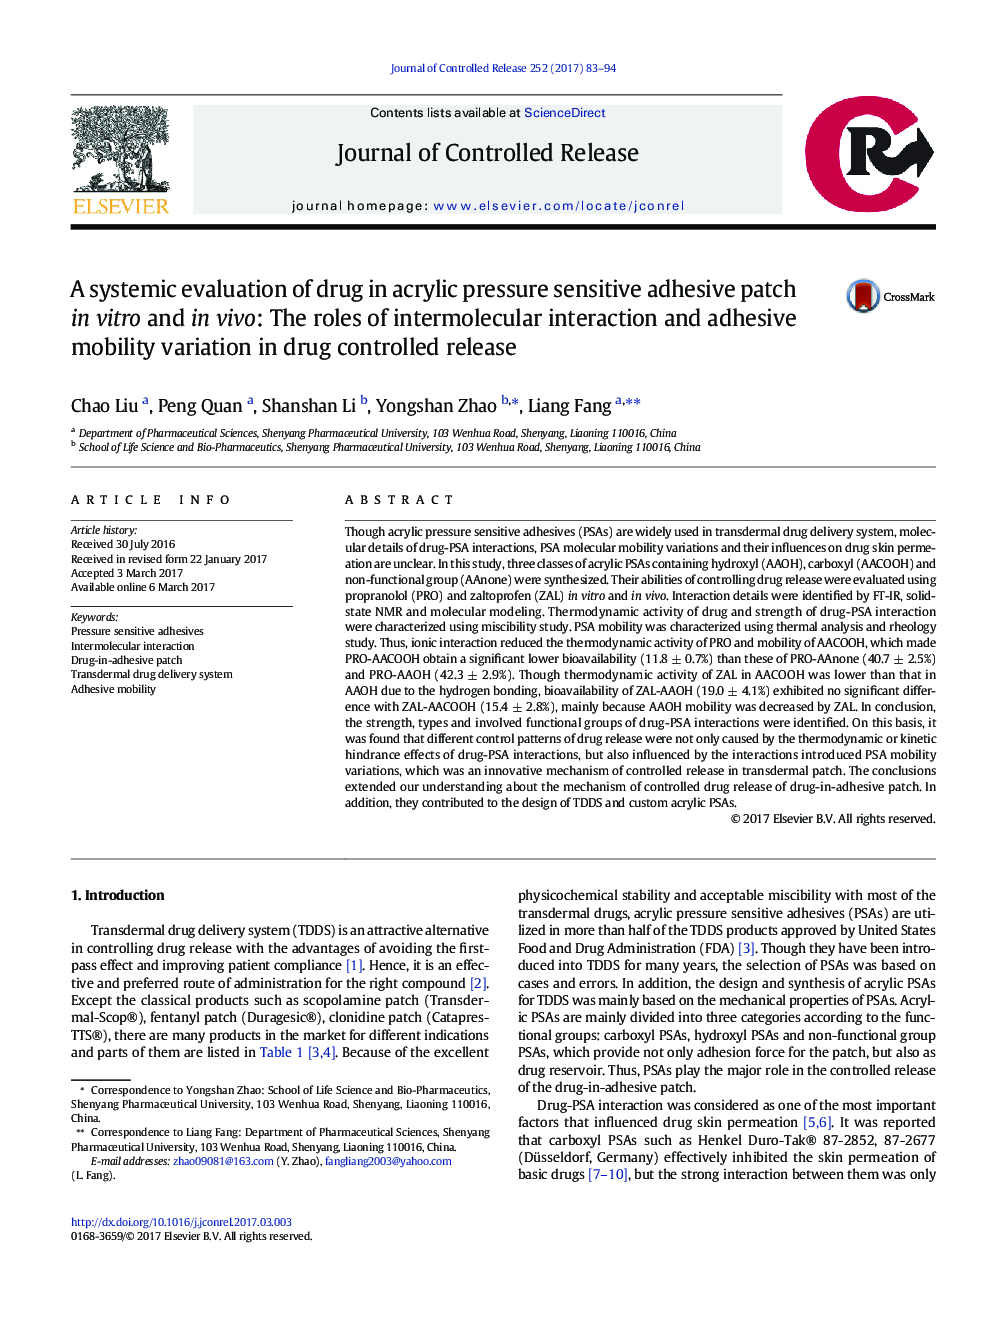 A systemic evaluation of drug in acrylic pressure sensitive adhesive patch in vitro and in vivo: The roles of intermolecular interaction and adhesive mobility variation in drug controlled release